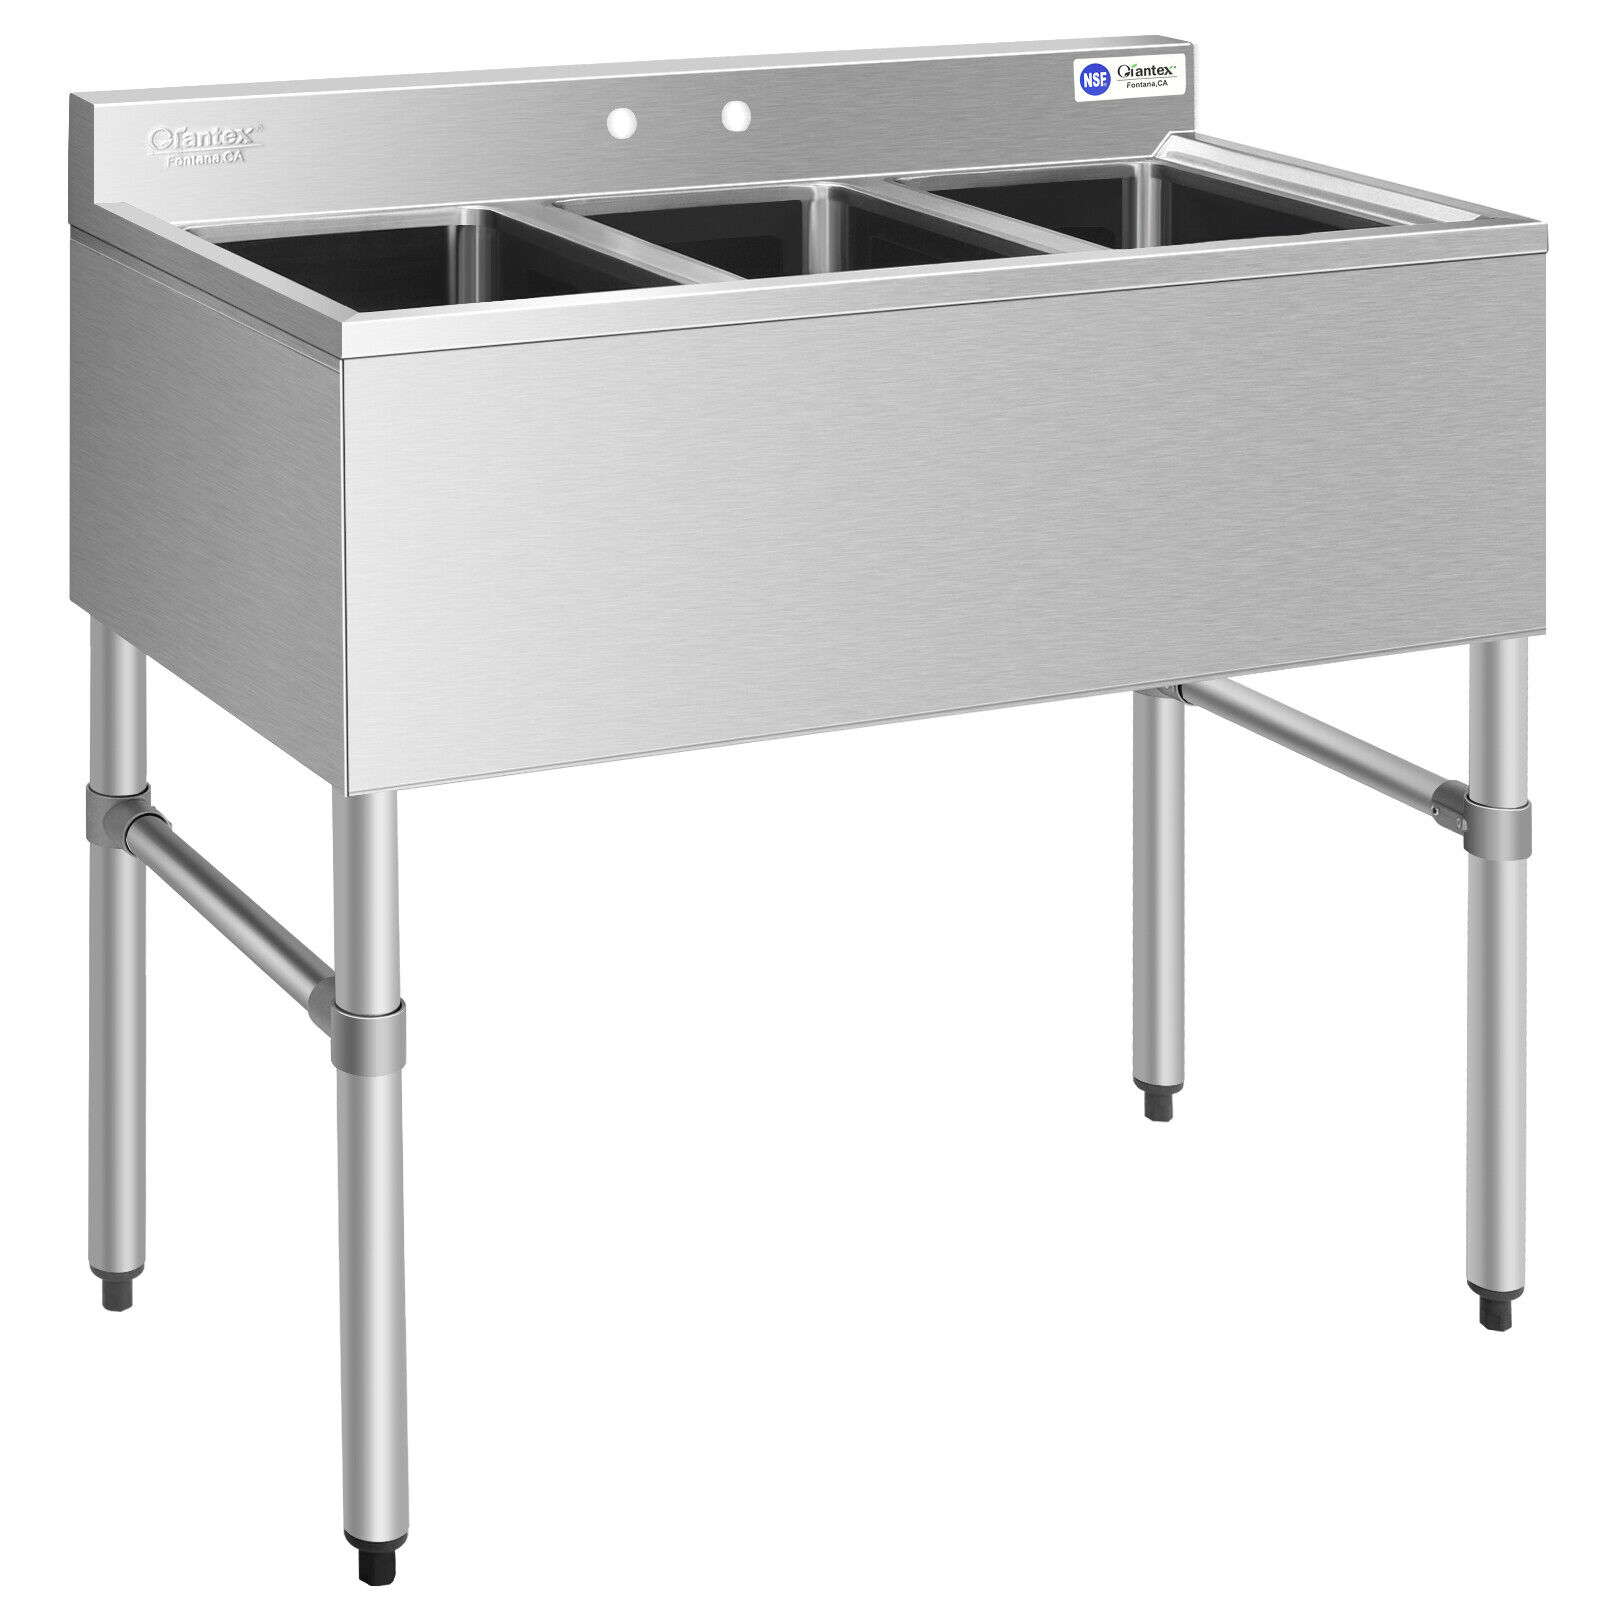 Giantex Nsf Utility Sink With 3 Compartment Commercial Kitchen Sink Stainless Steel For Sale Online Ebay